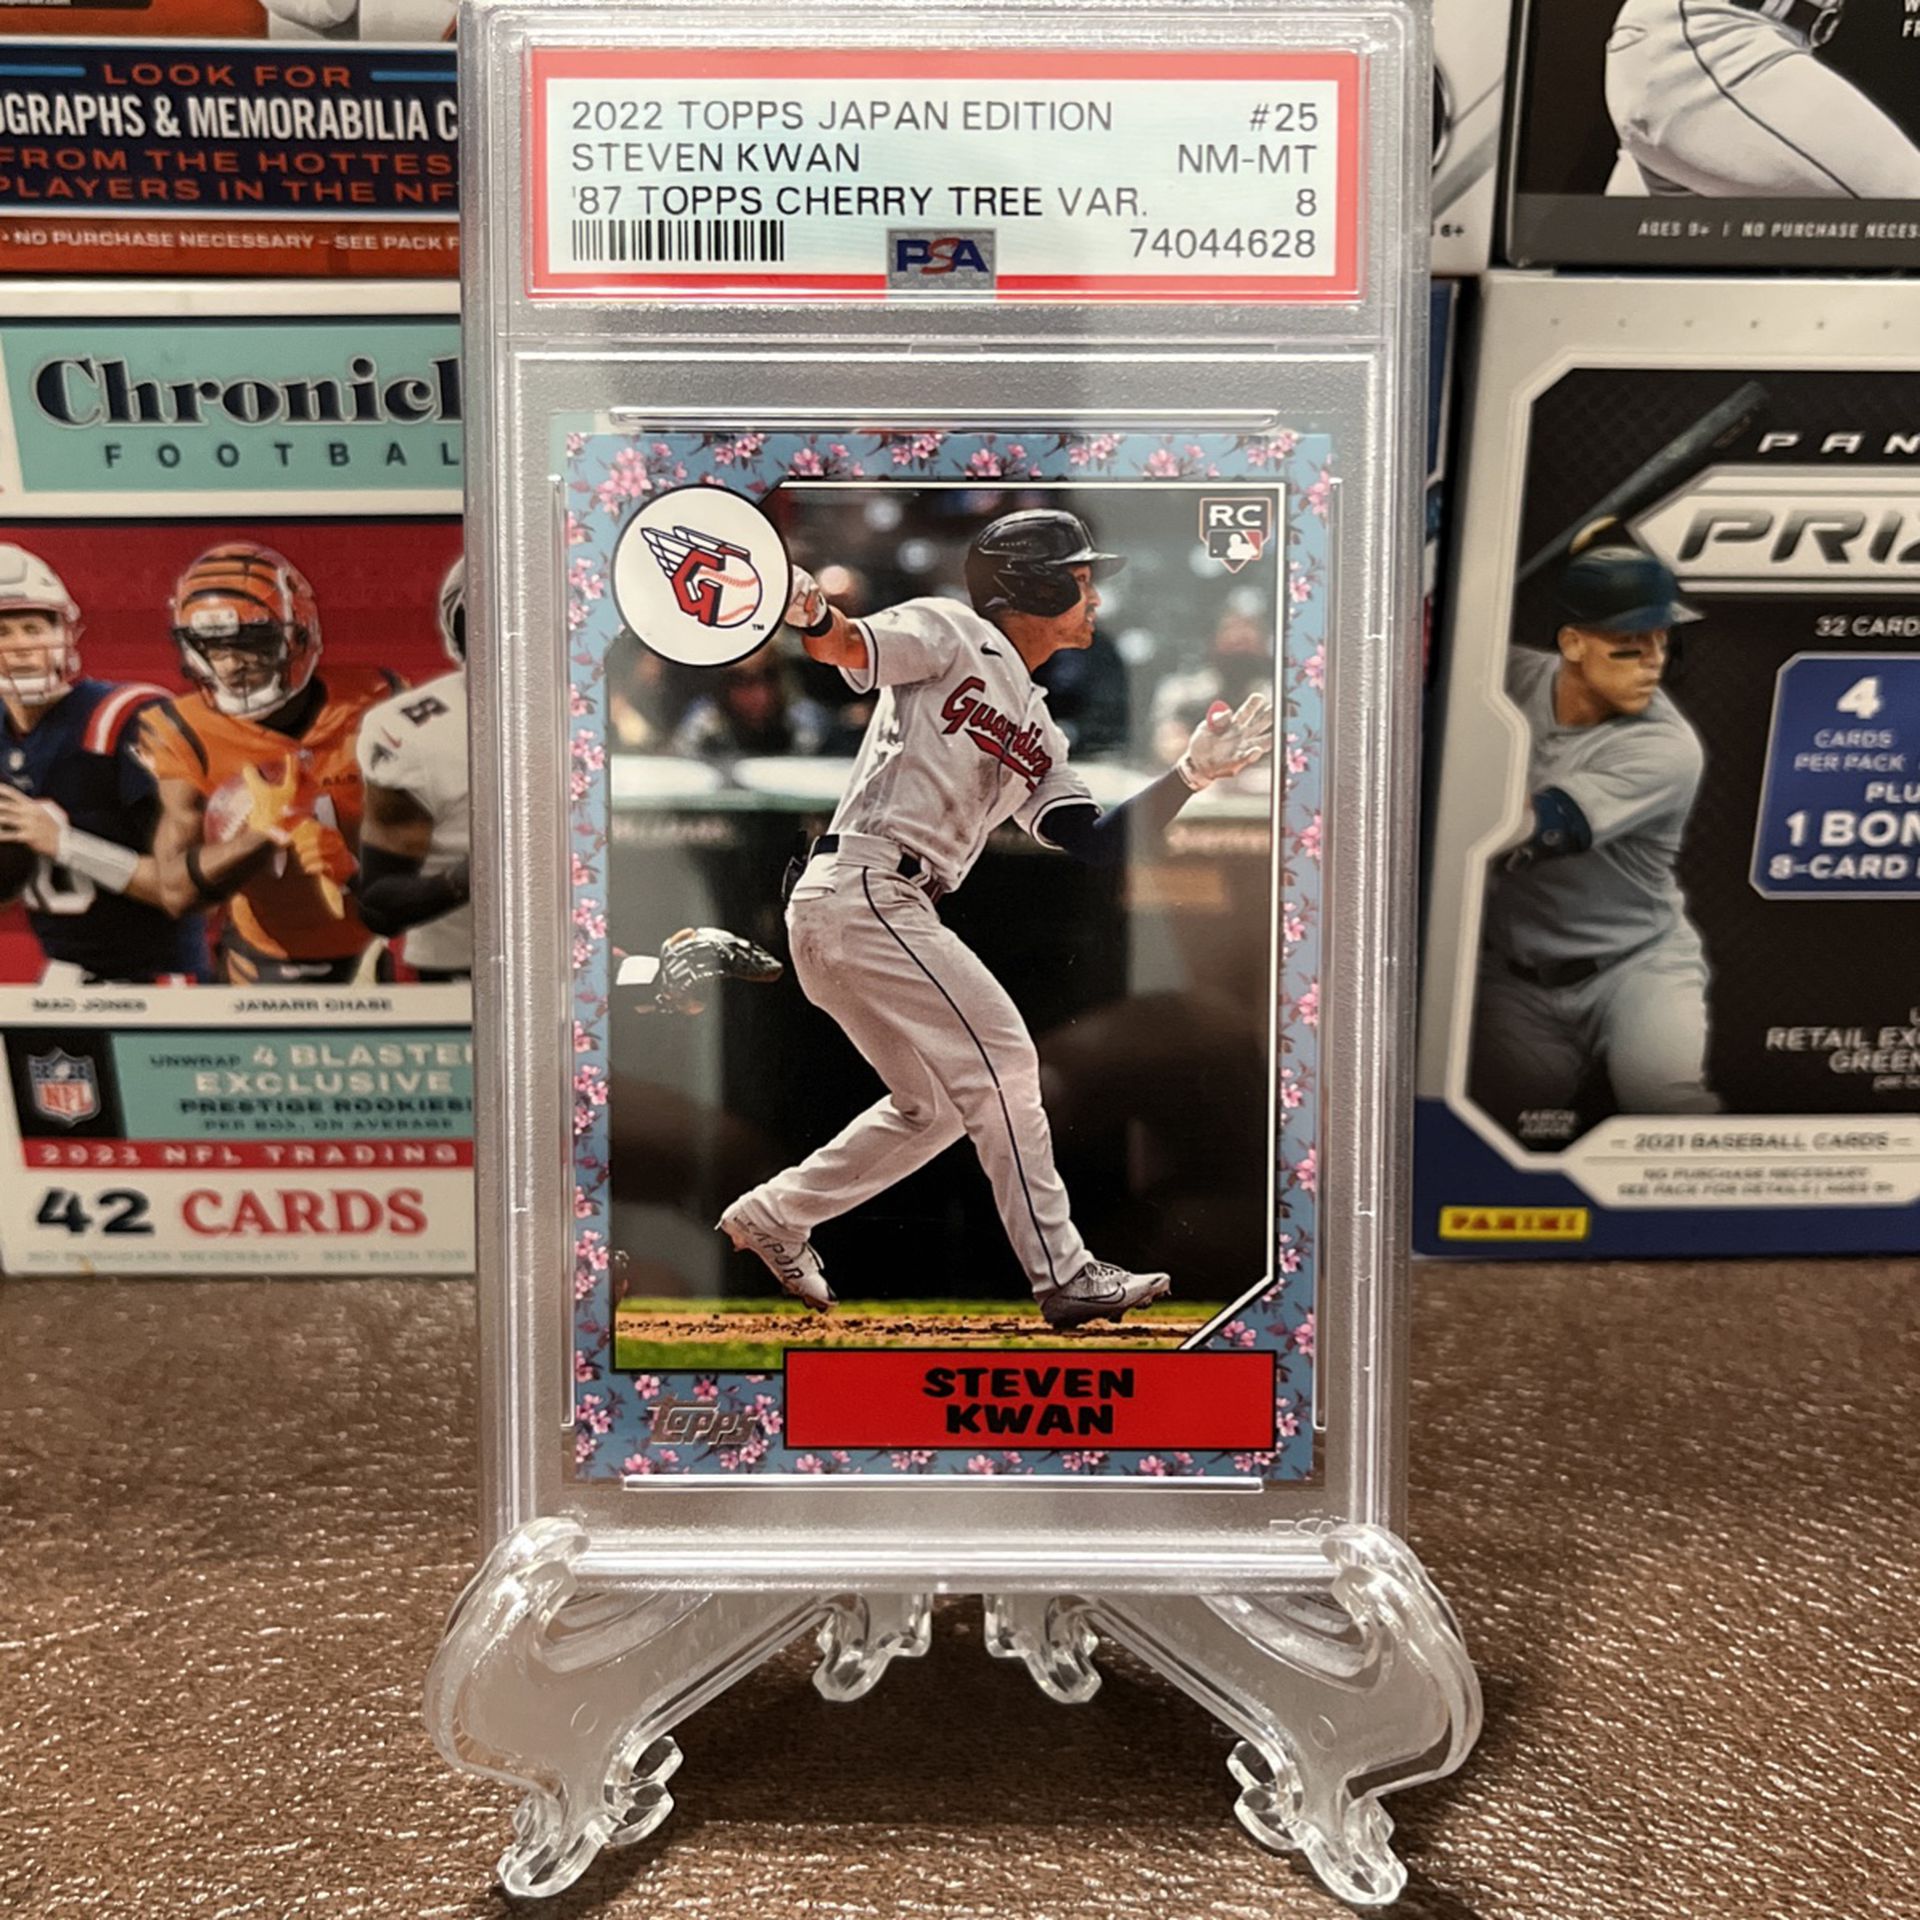 2022 Topps MLB Baseball Japan Edition STEVEN KWAN 1987 Cherry Tree Rookie  RC for Sale in Downey, CA - OfferUp